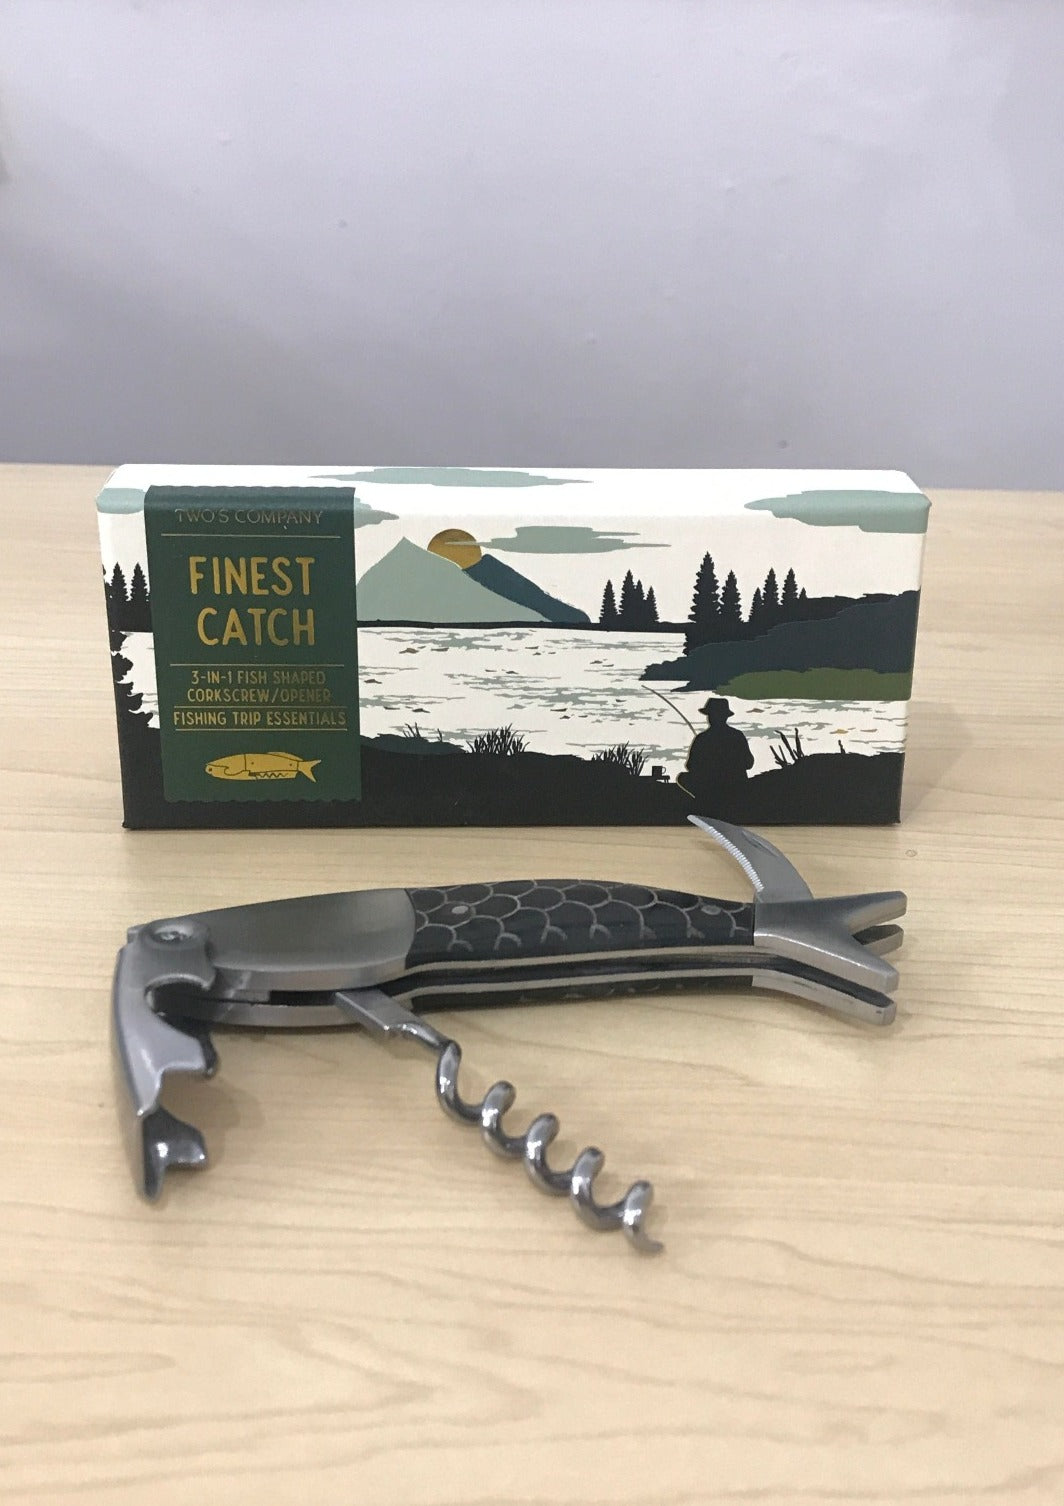 Finest Catch 3-in-1 Tool Gift Box Two's Company